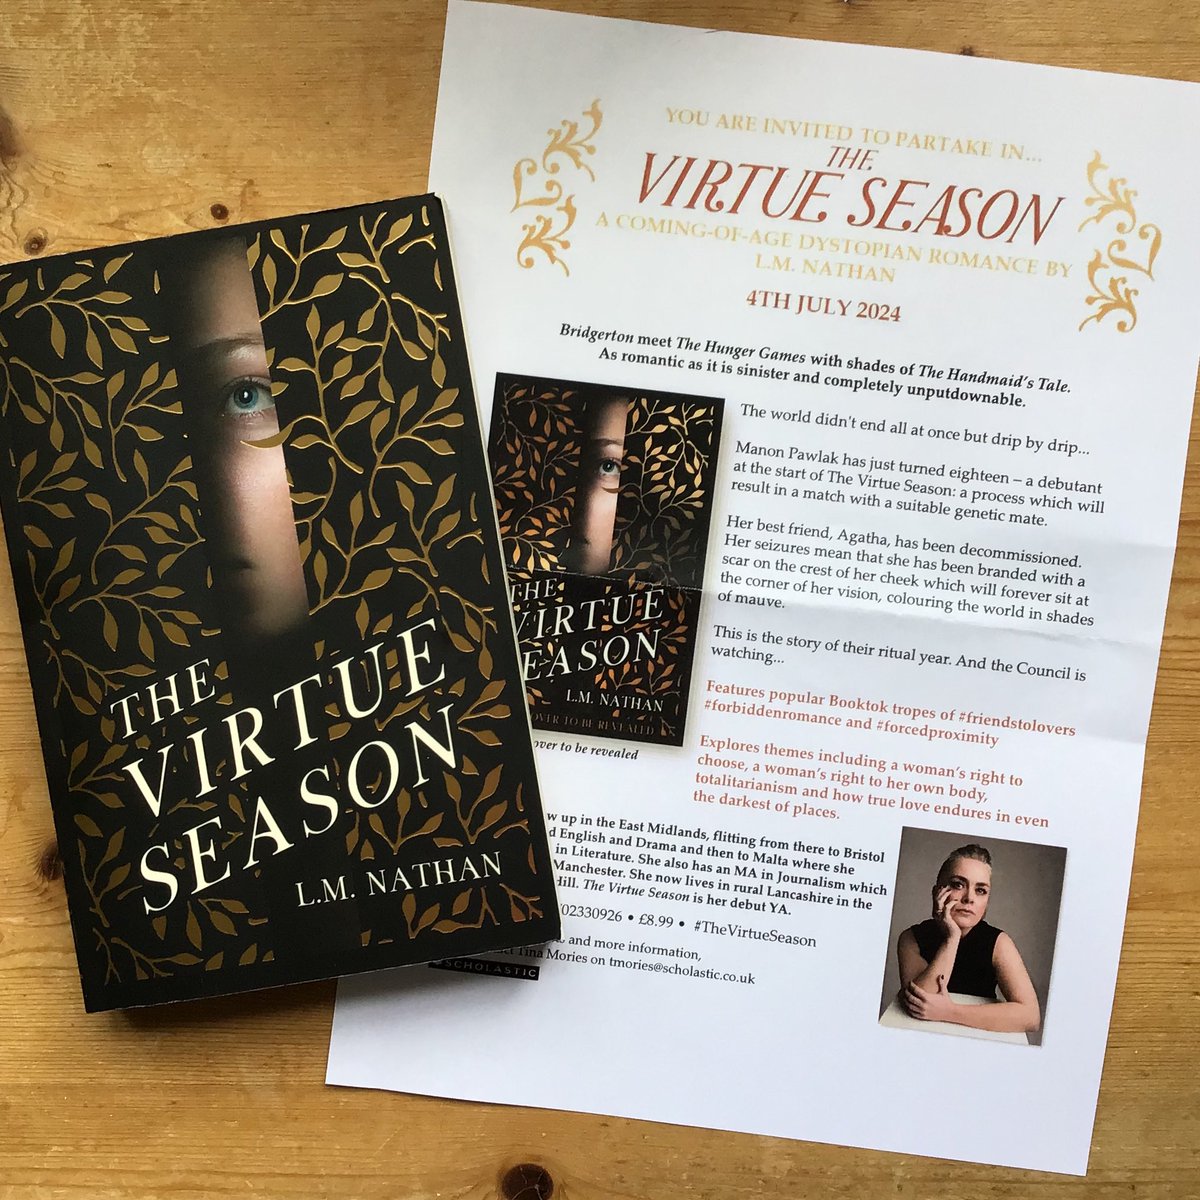 Described as Bridgerton meets The Hunger Games with shades of The Handmaid's Tale, new #YA title #TheVirtueSeason by @lmnathanwriter sounds brilliant. Enormous thanks to @TinaMories @scholasticuk Out 04/07